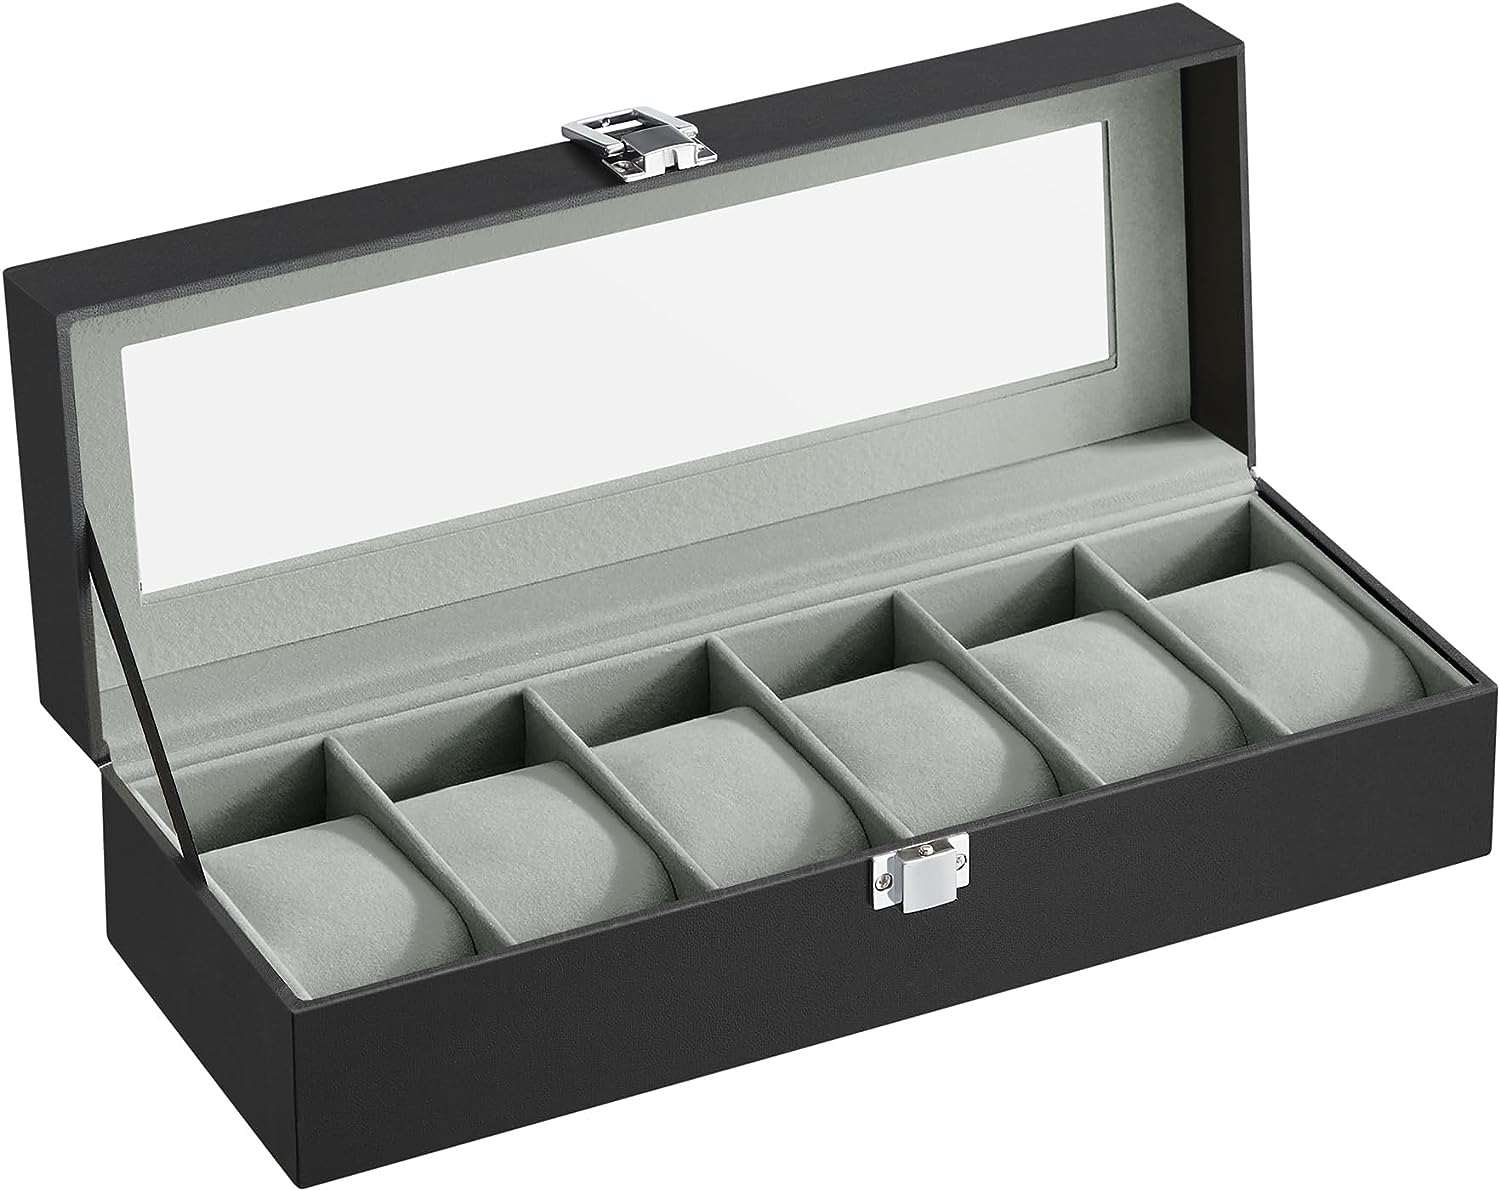 Blushbees® 6-Slot Watch Box - Black Synthetic Leather with Gray Lining